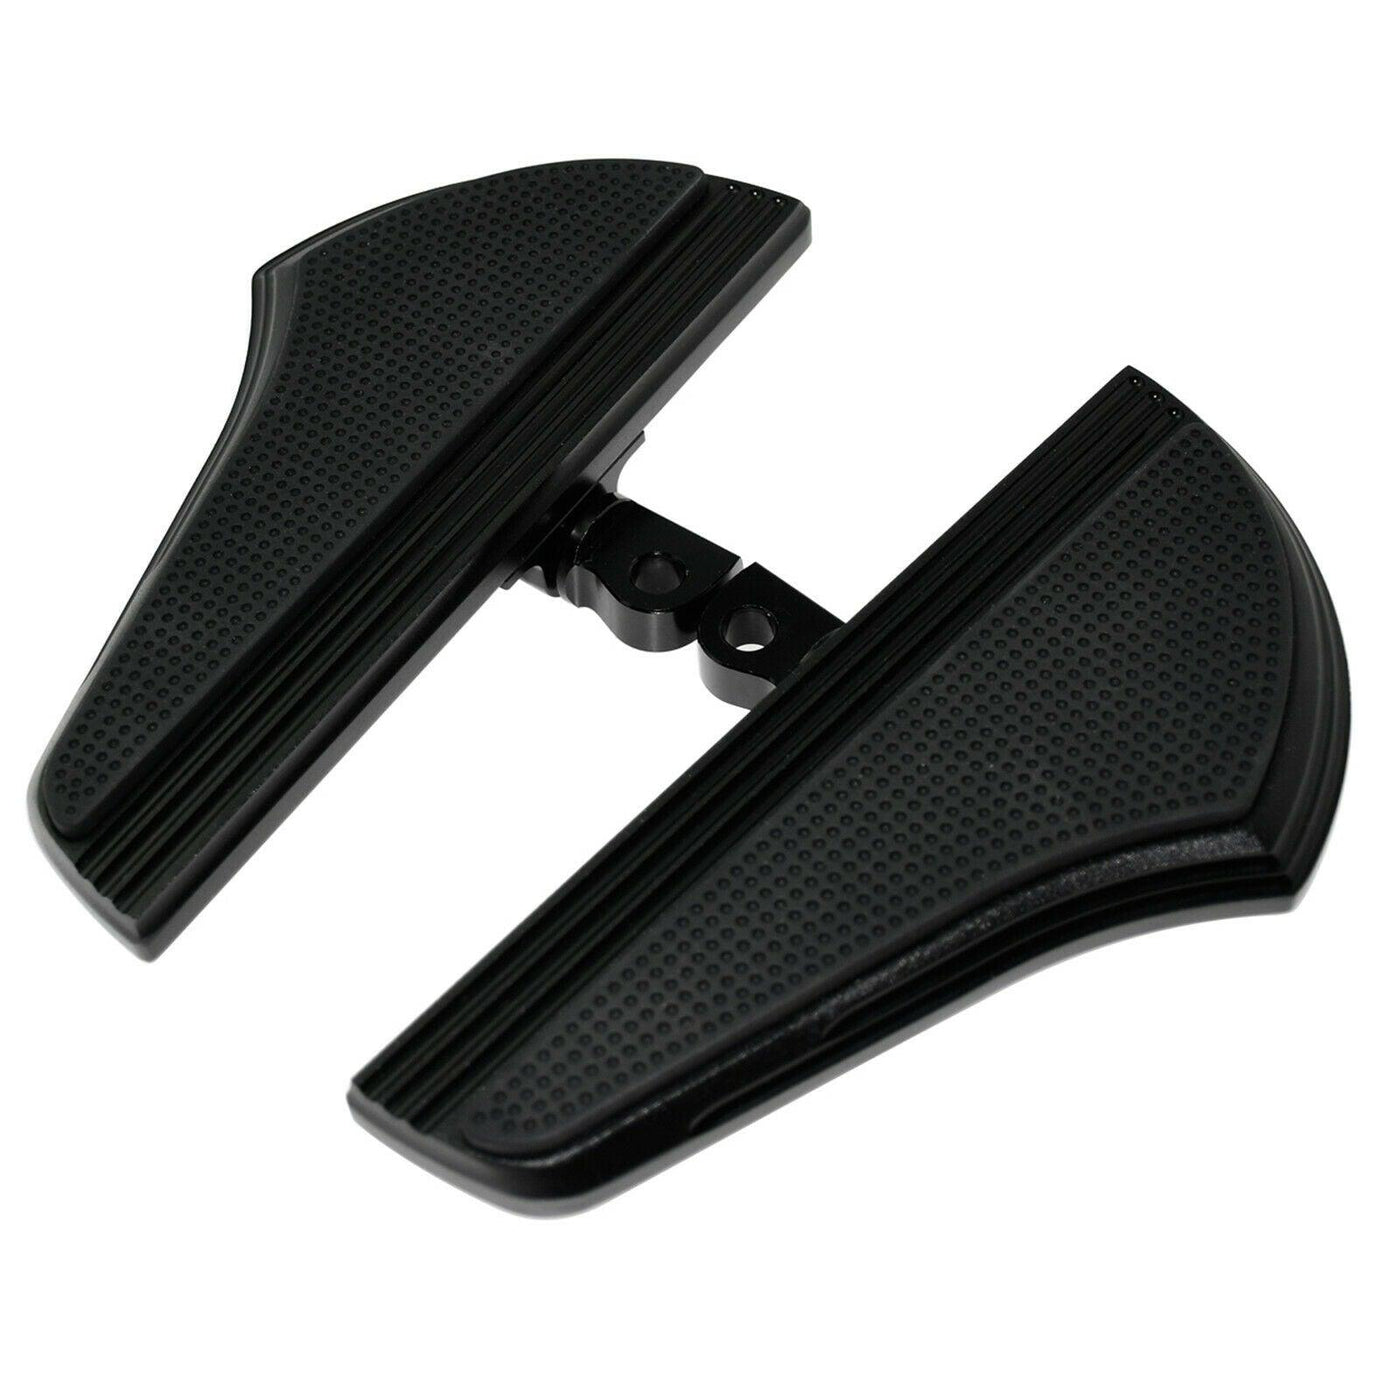 Defiance Driver Passenger Floorboards Brake Cover Shifter Lever Fit For Harley - Moto Life Products